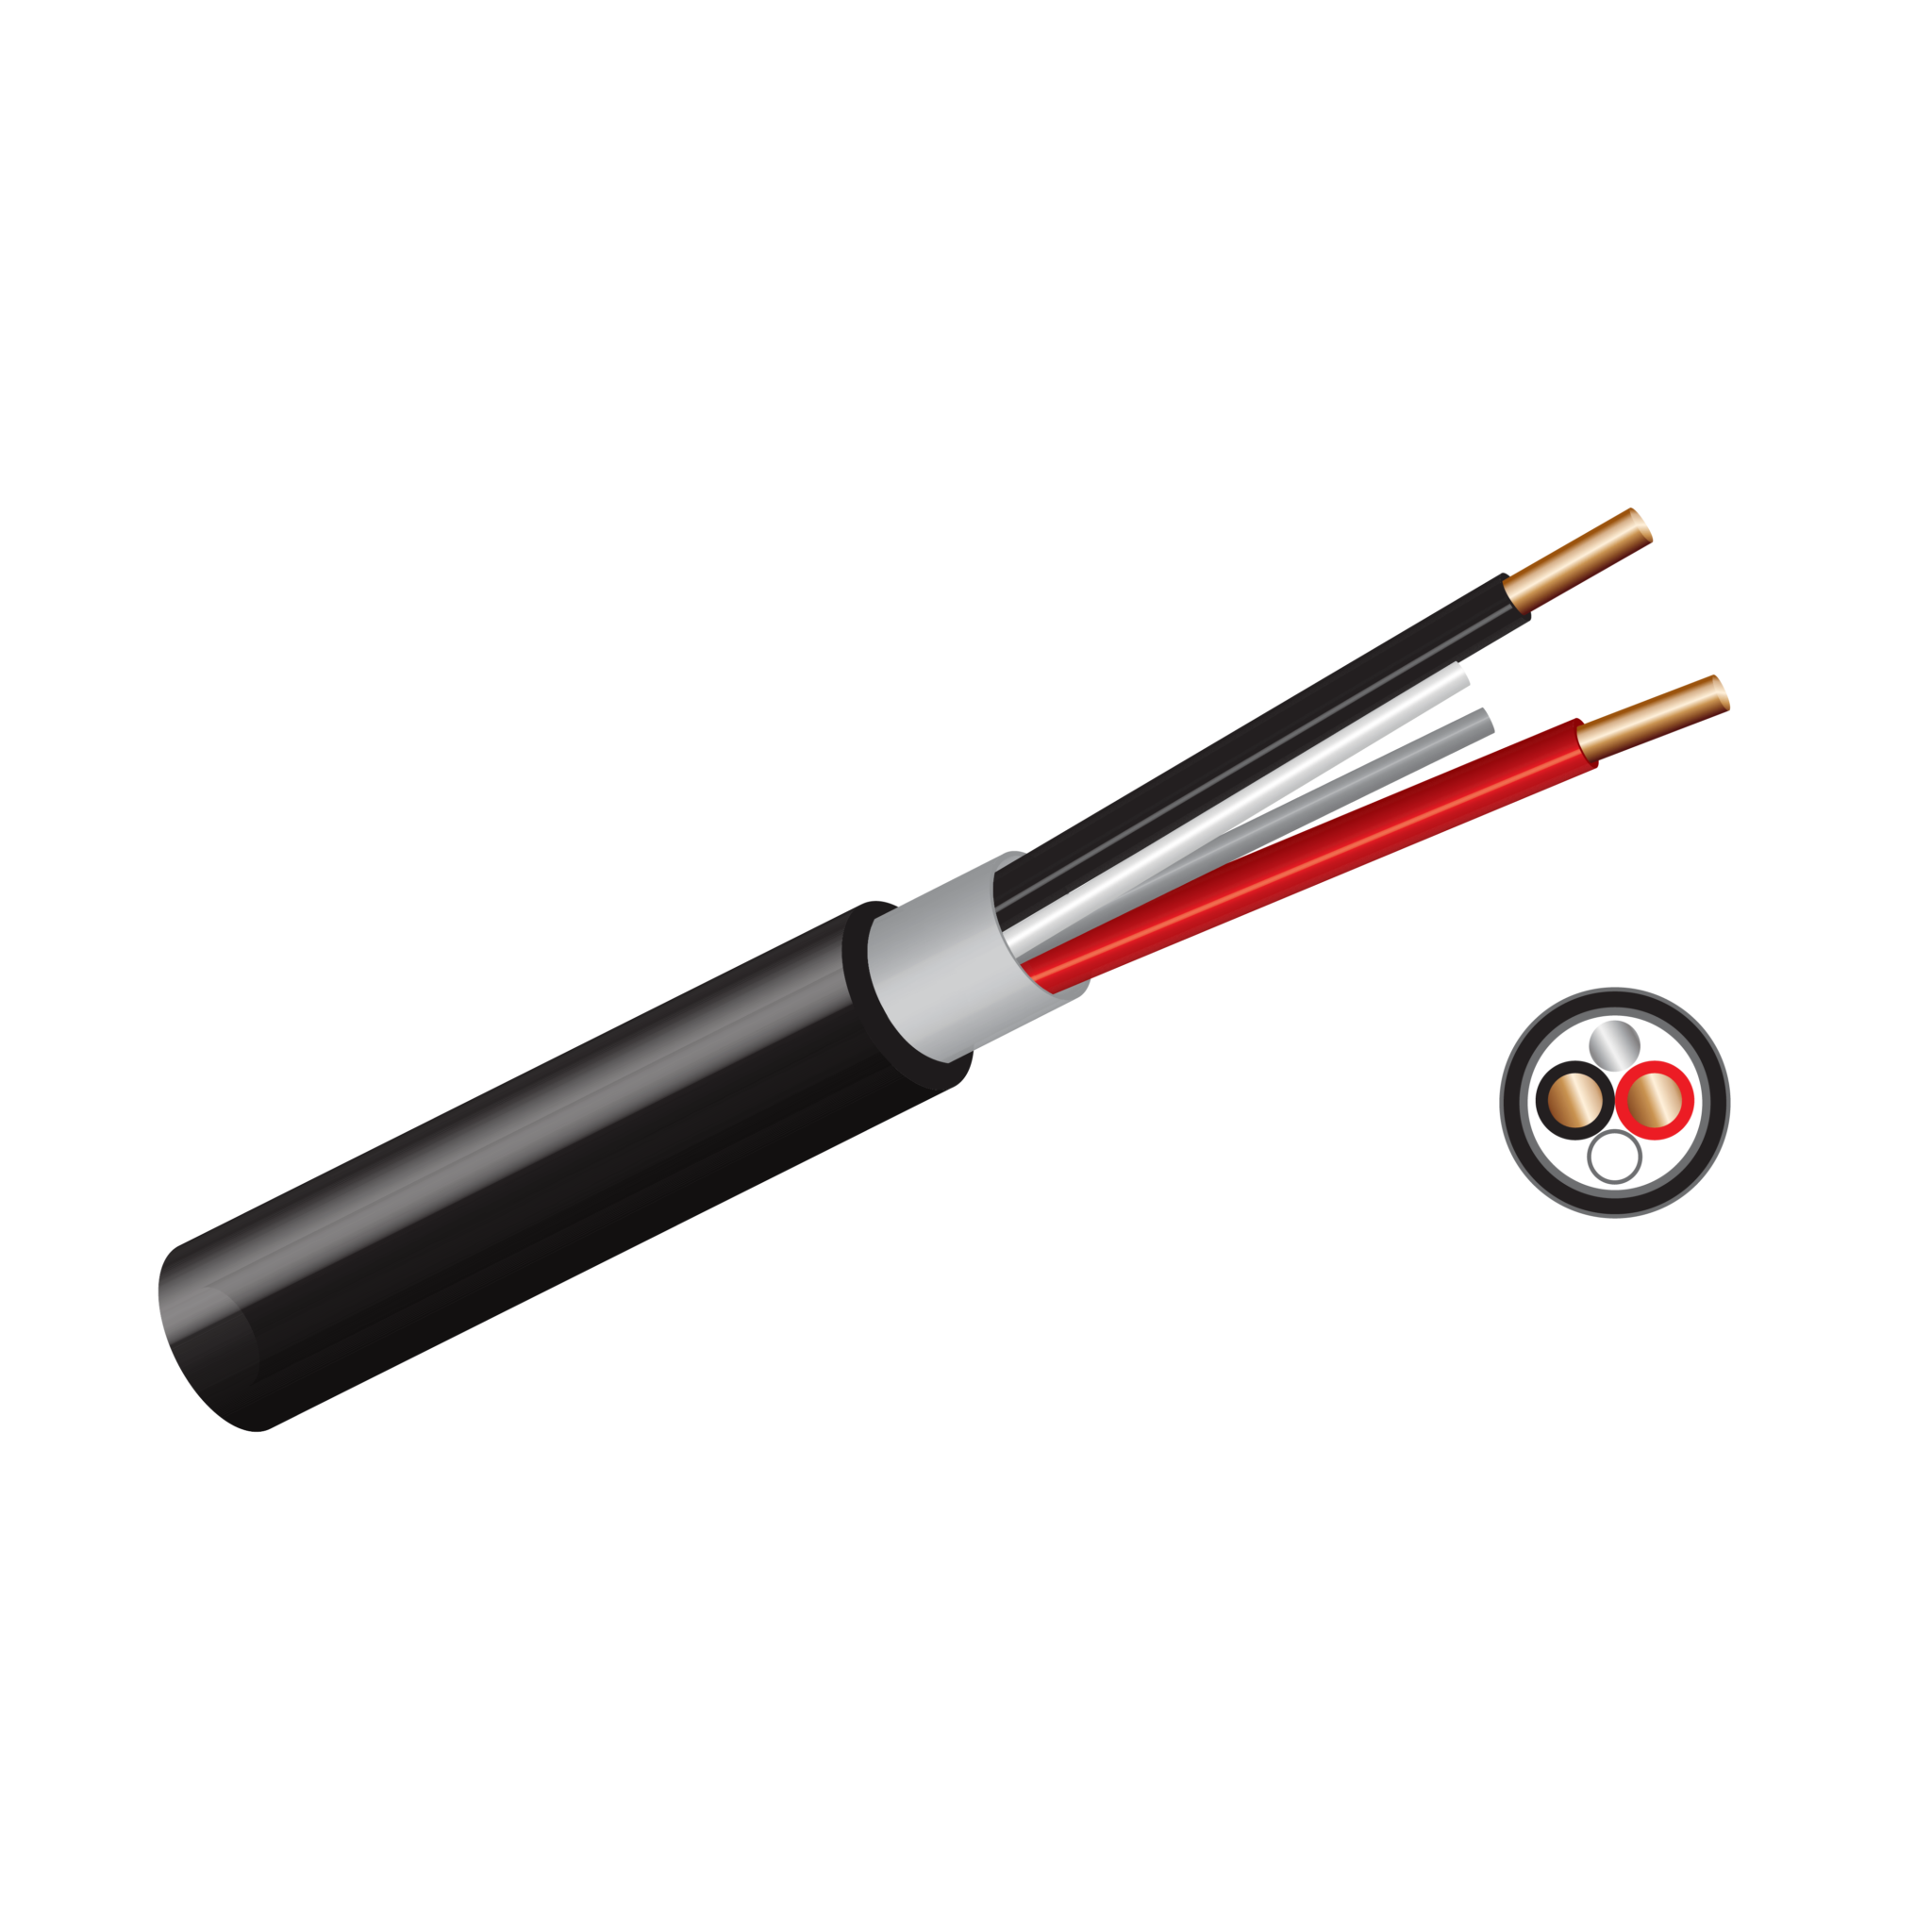 Surfix Cable - Black 2.5mm 2 Core + Earth (Launch Special)